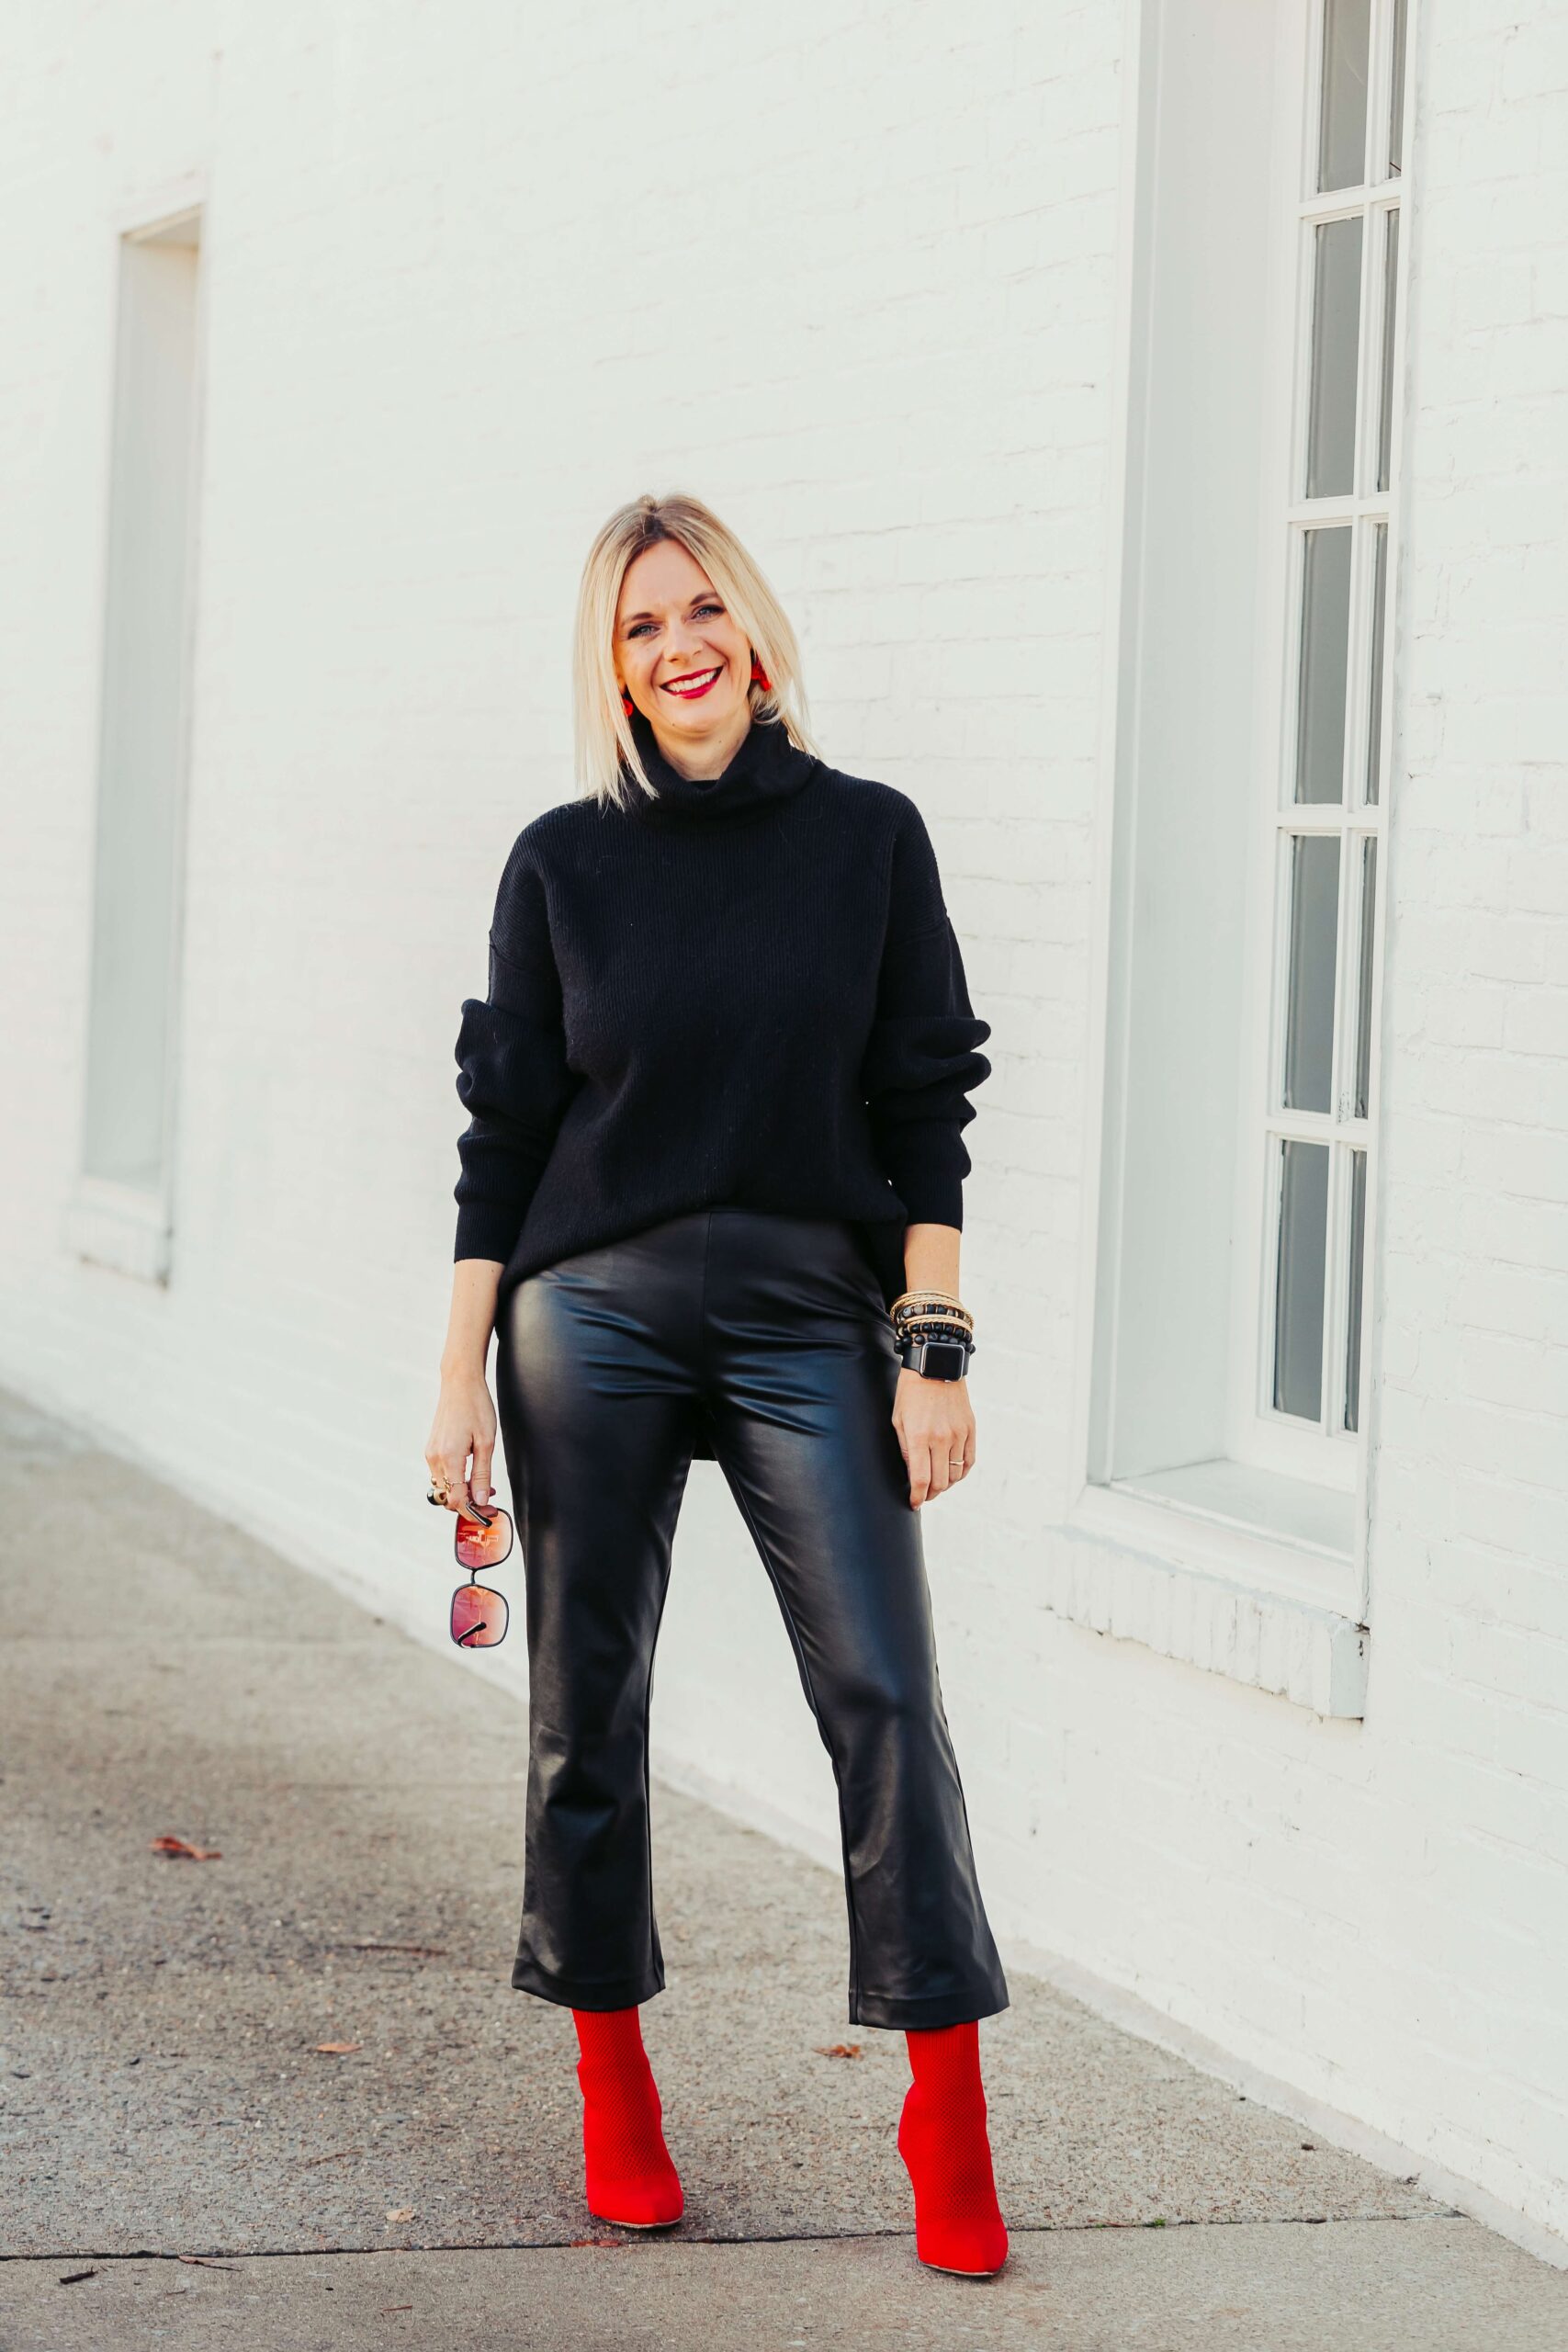 How To Accessorize Your All Black Look This Holiday Season Red Accessories how to accessorize with red for the holidays how to use jewelry to make your all black look festive how to style red booties how to wear all black with red shoes